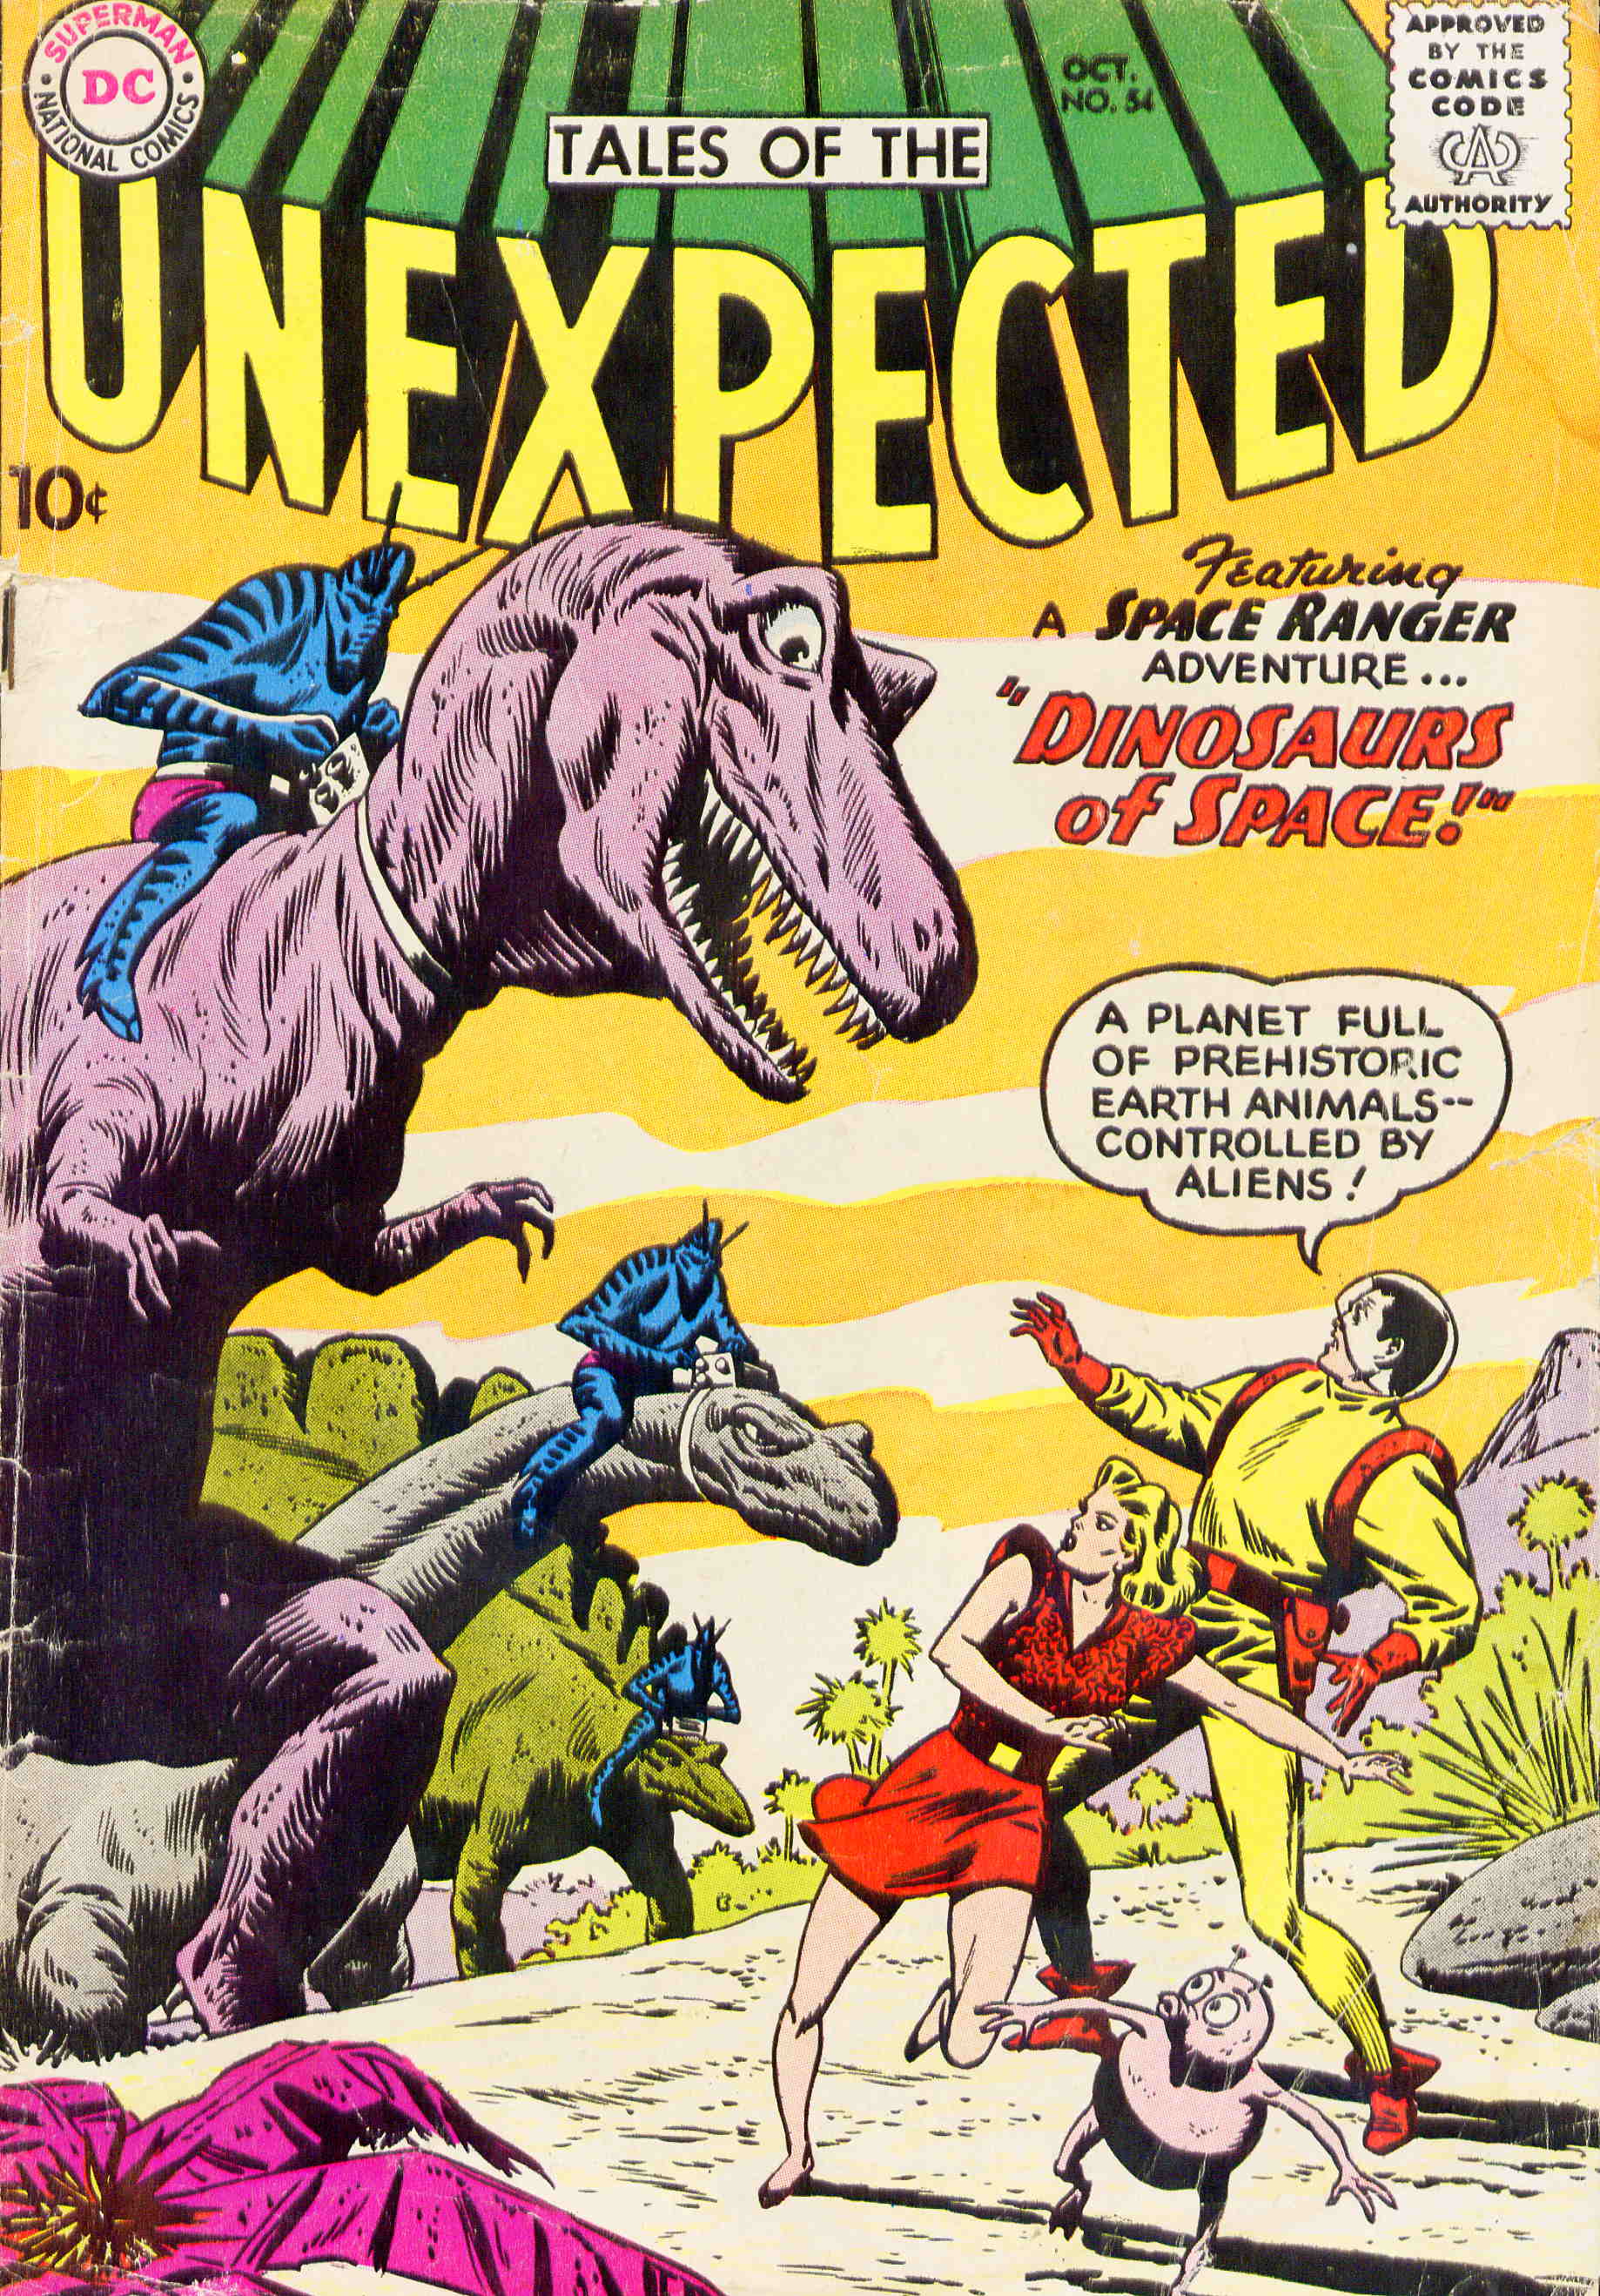 Read online Tales of the Unexpected comic -  Issue #54 - 1